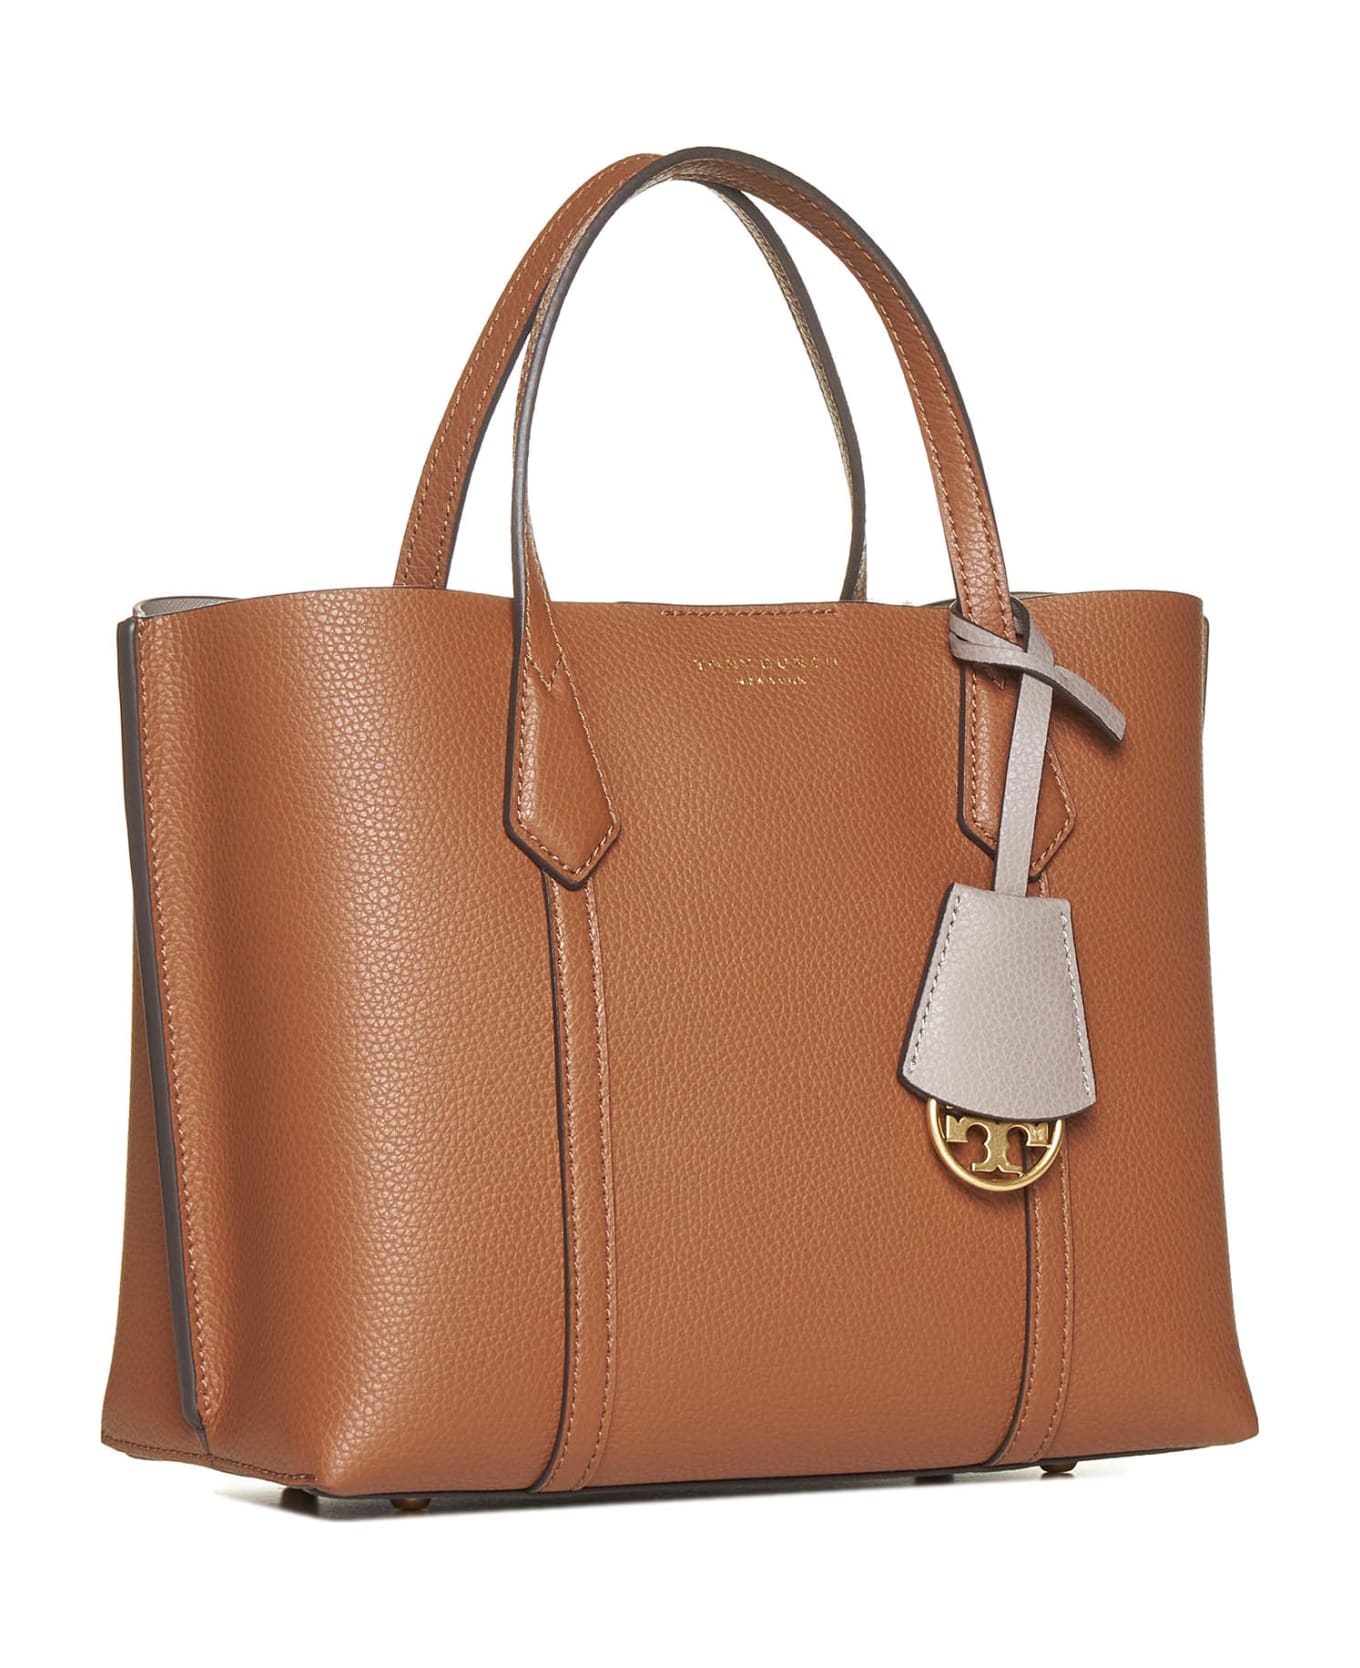 Tory Burch Leather Tote Bag - Brown